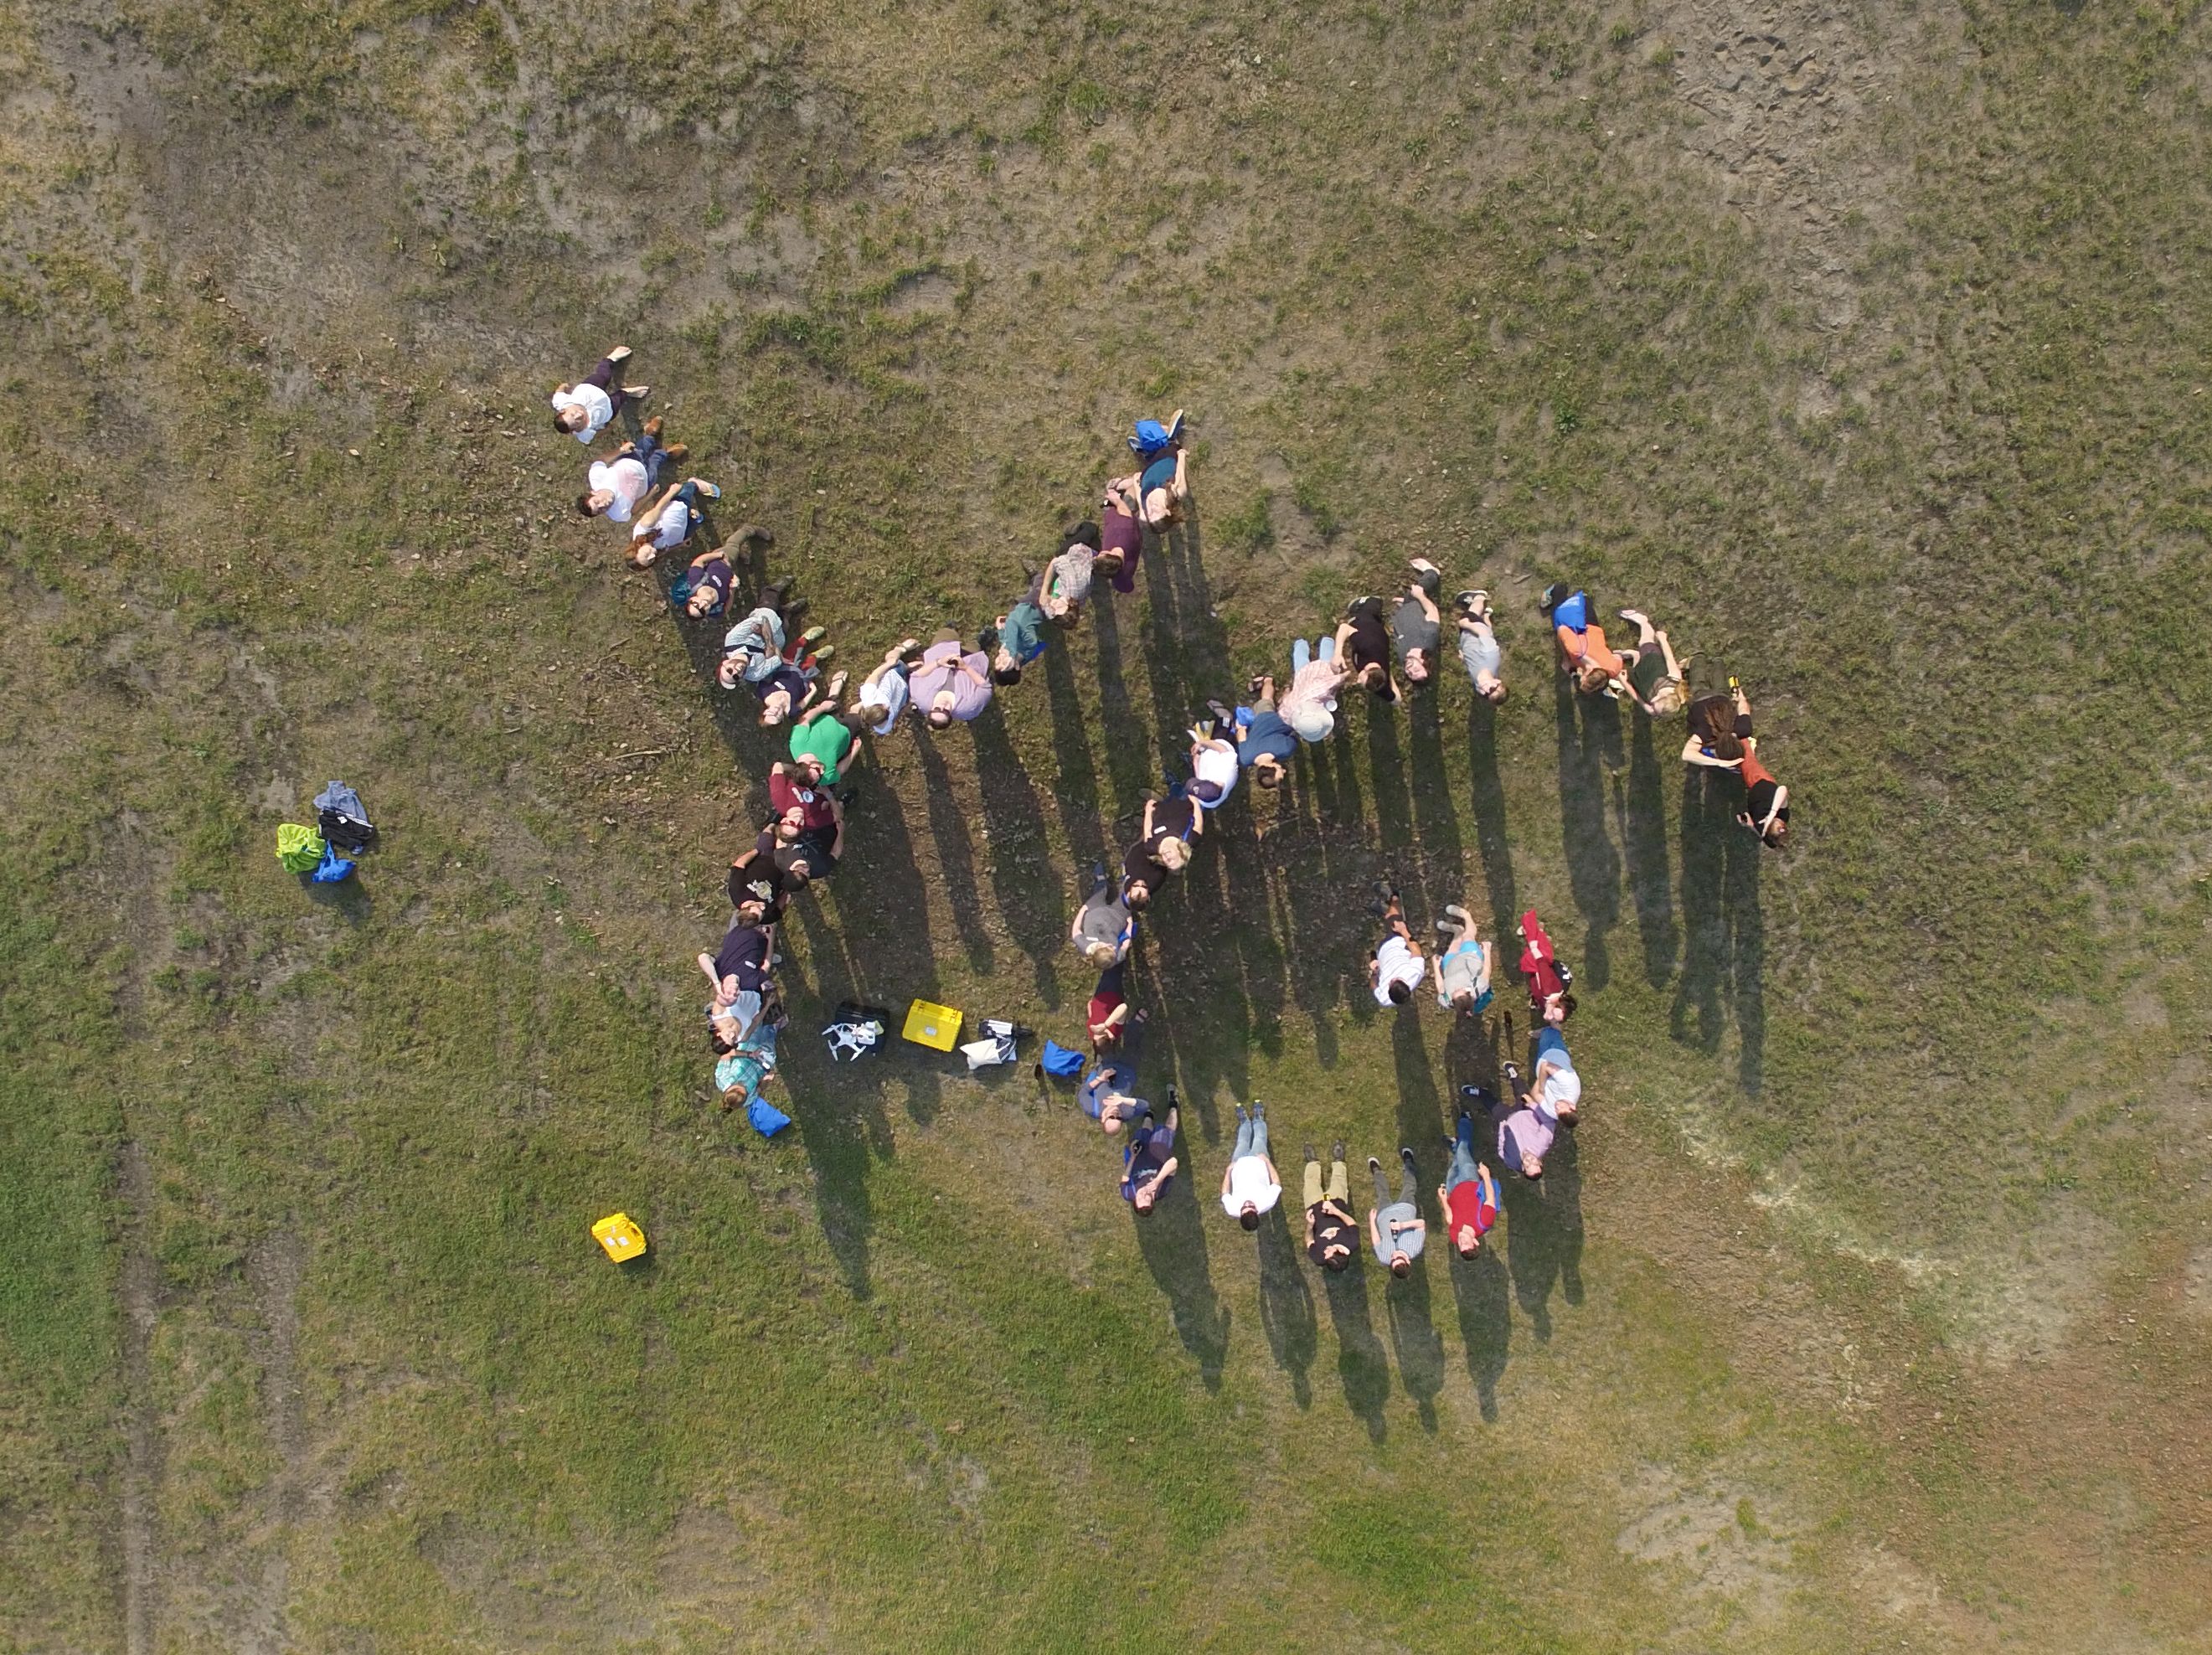 Group picture of the 2016 Young Geomorphologists' workshop in Werbellinsee (taken by Kristen Cook and her drone)